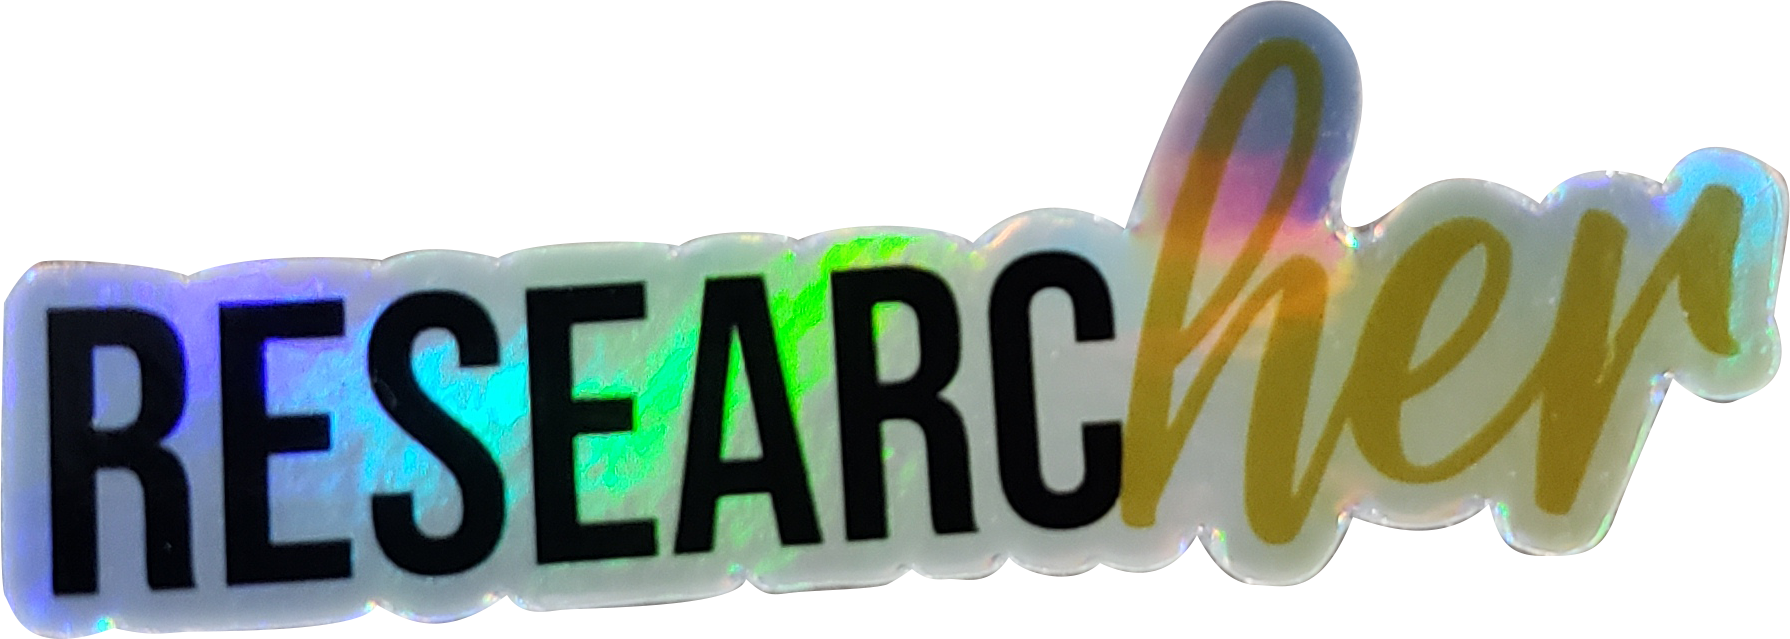 ResearcHER Holographic Sticker